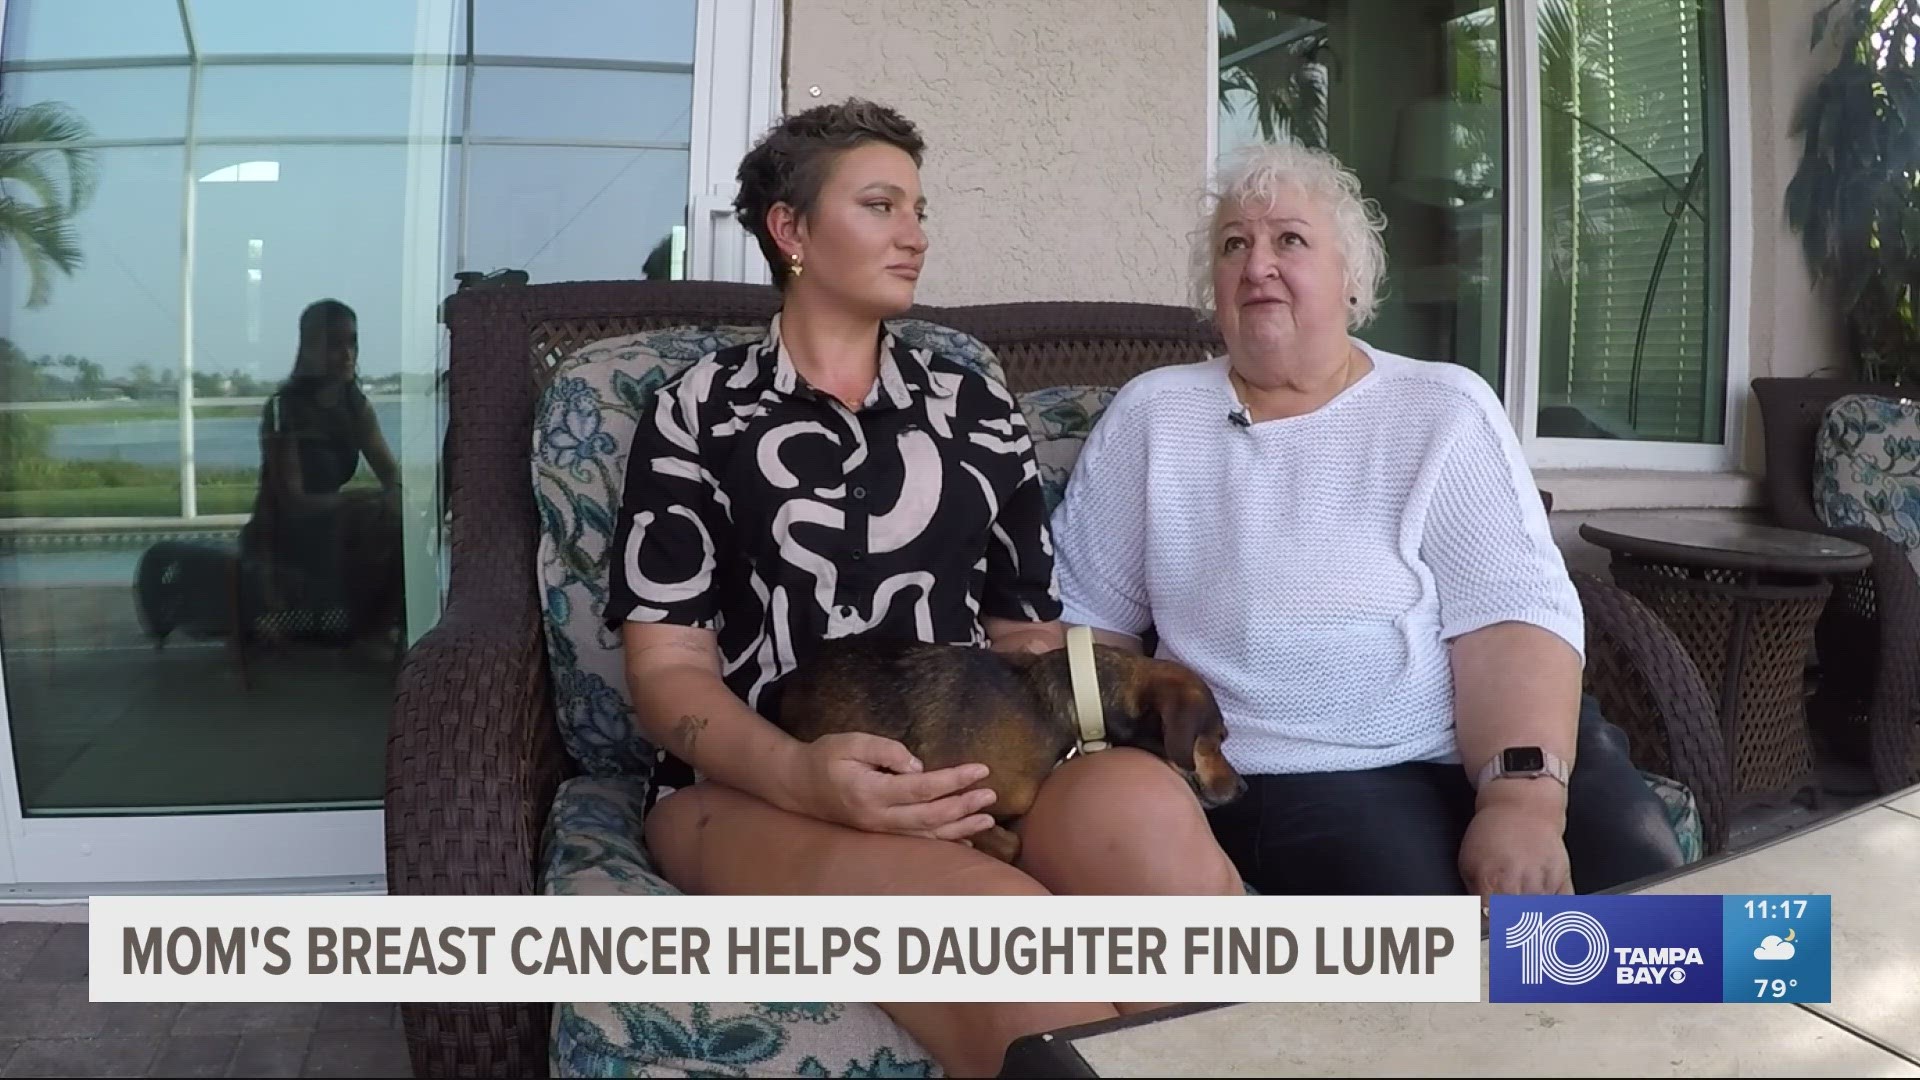 During this Breast Cancer Awareness Month, Madeline Mordarski and her mother Doreen Wesley are highlighting the importance of early detection.